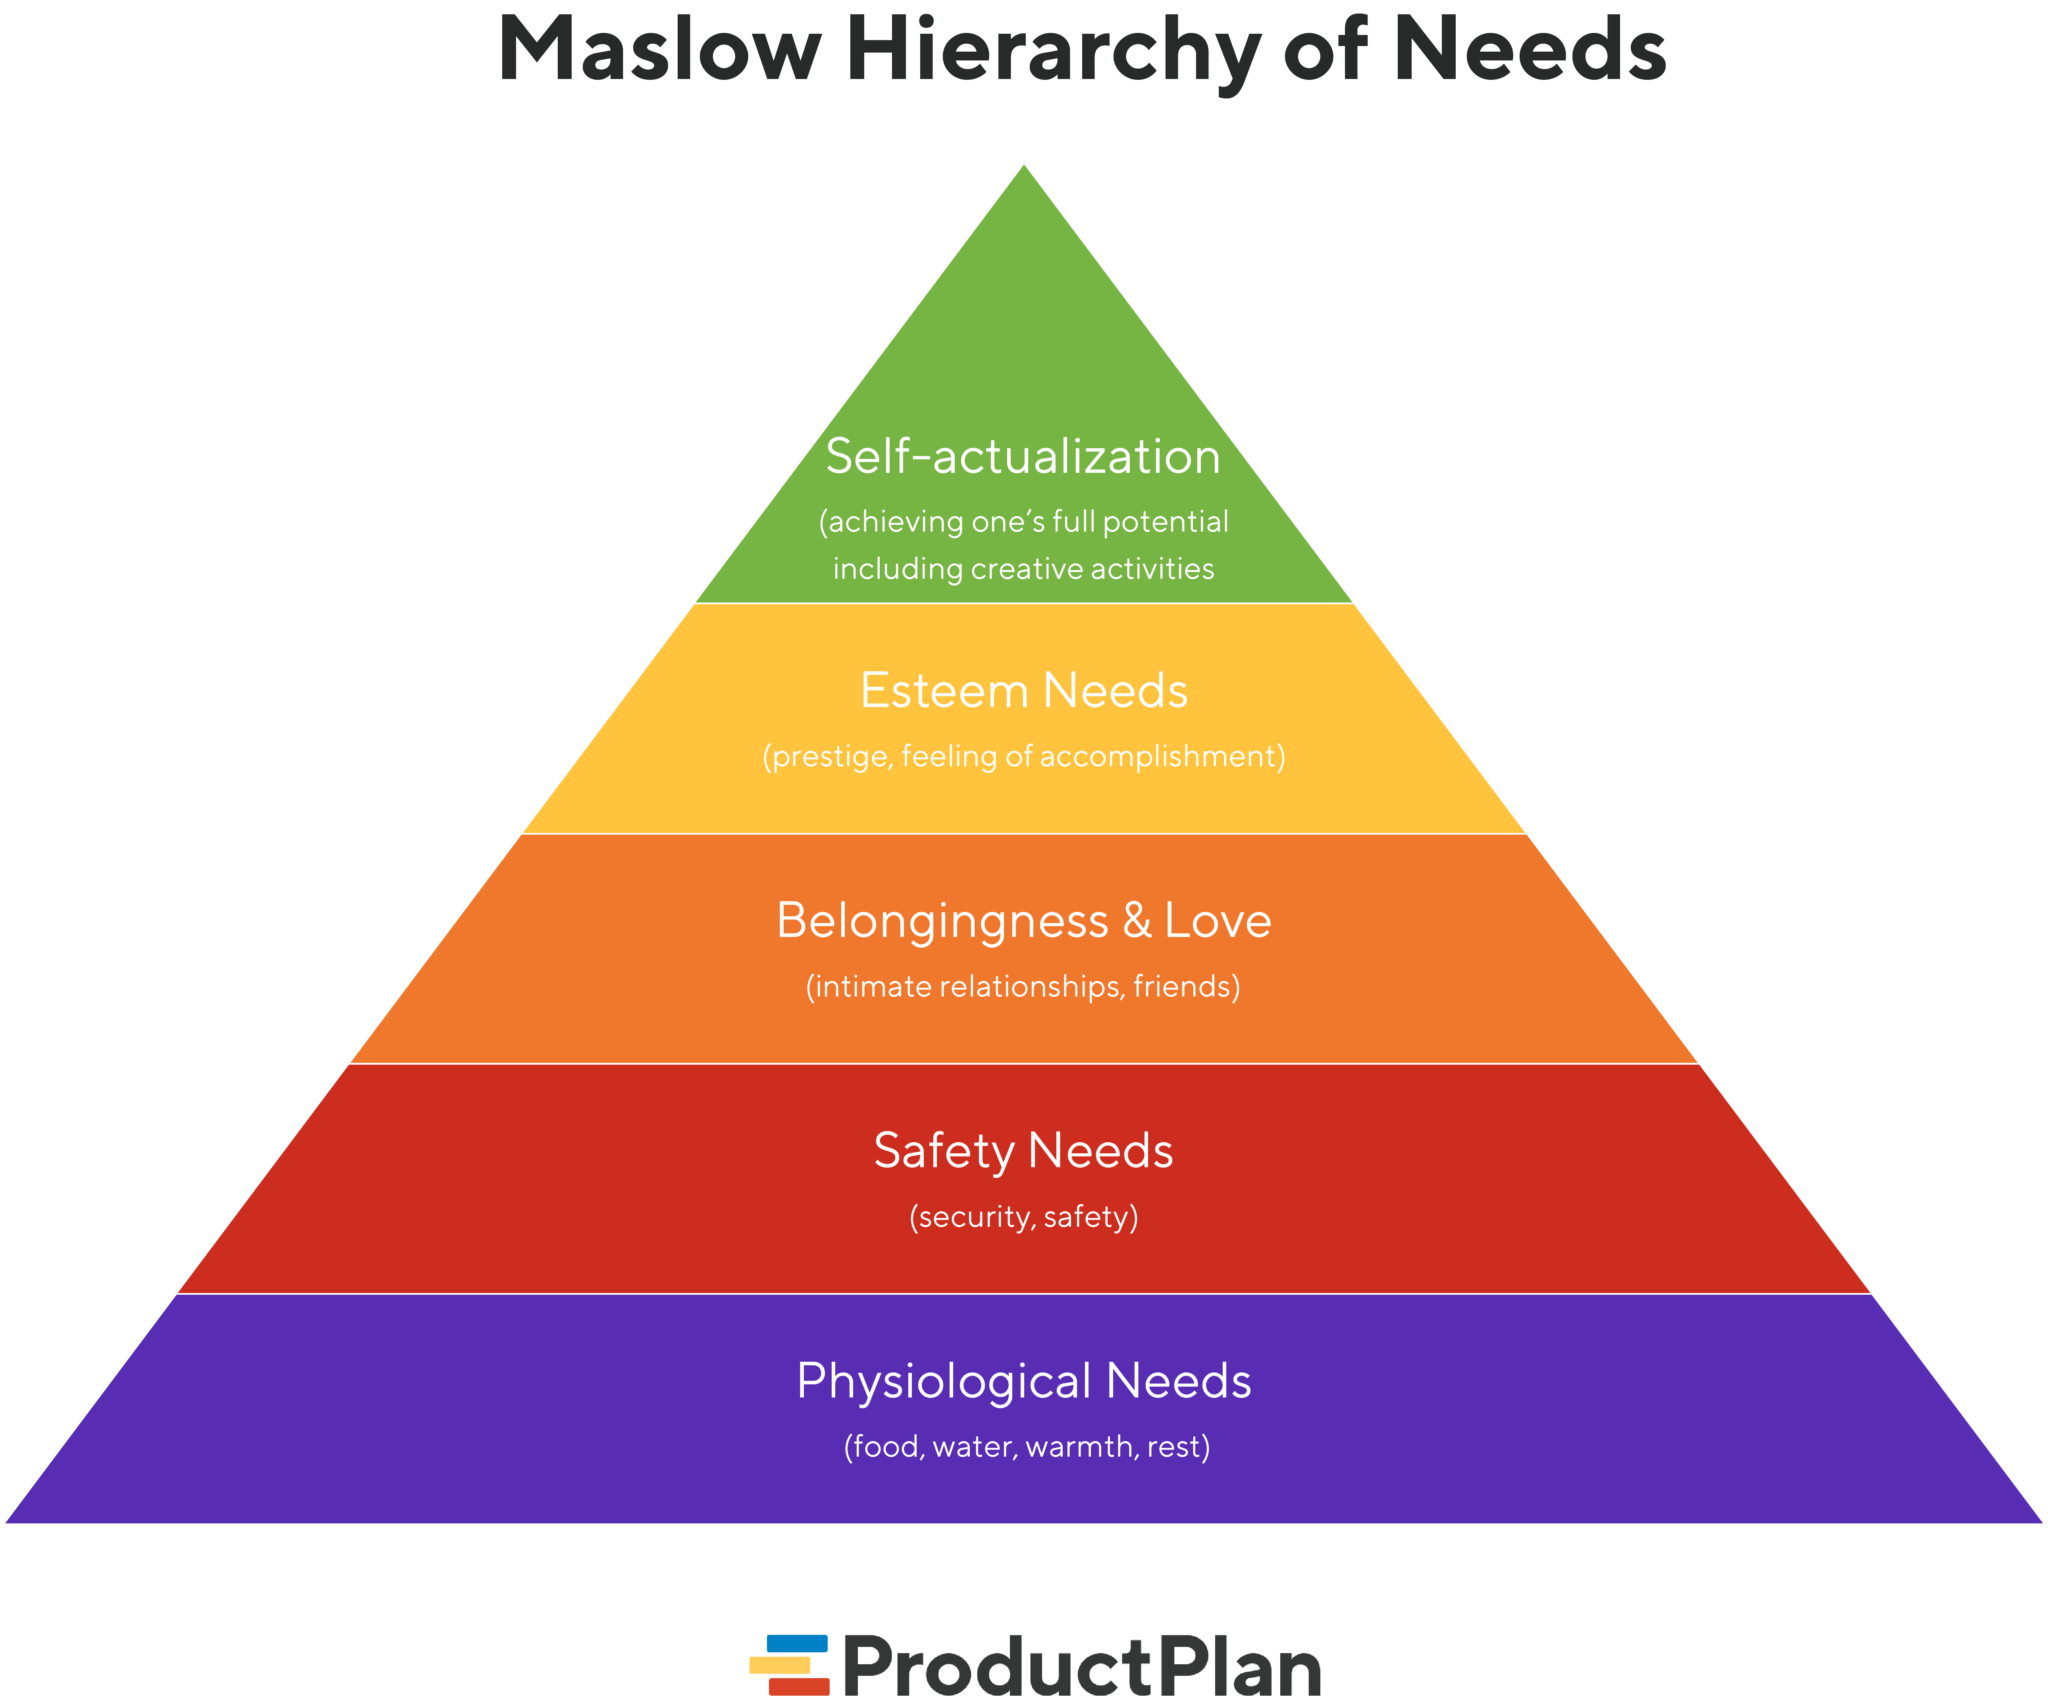 6 Rules of Product Design According to Maslow's Hierarchy of Needs